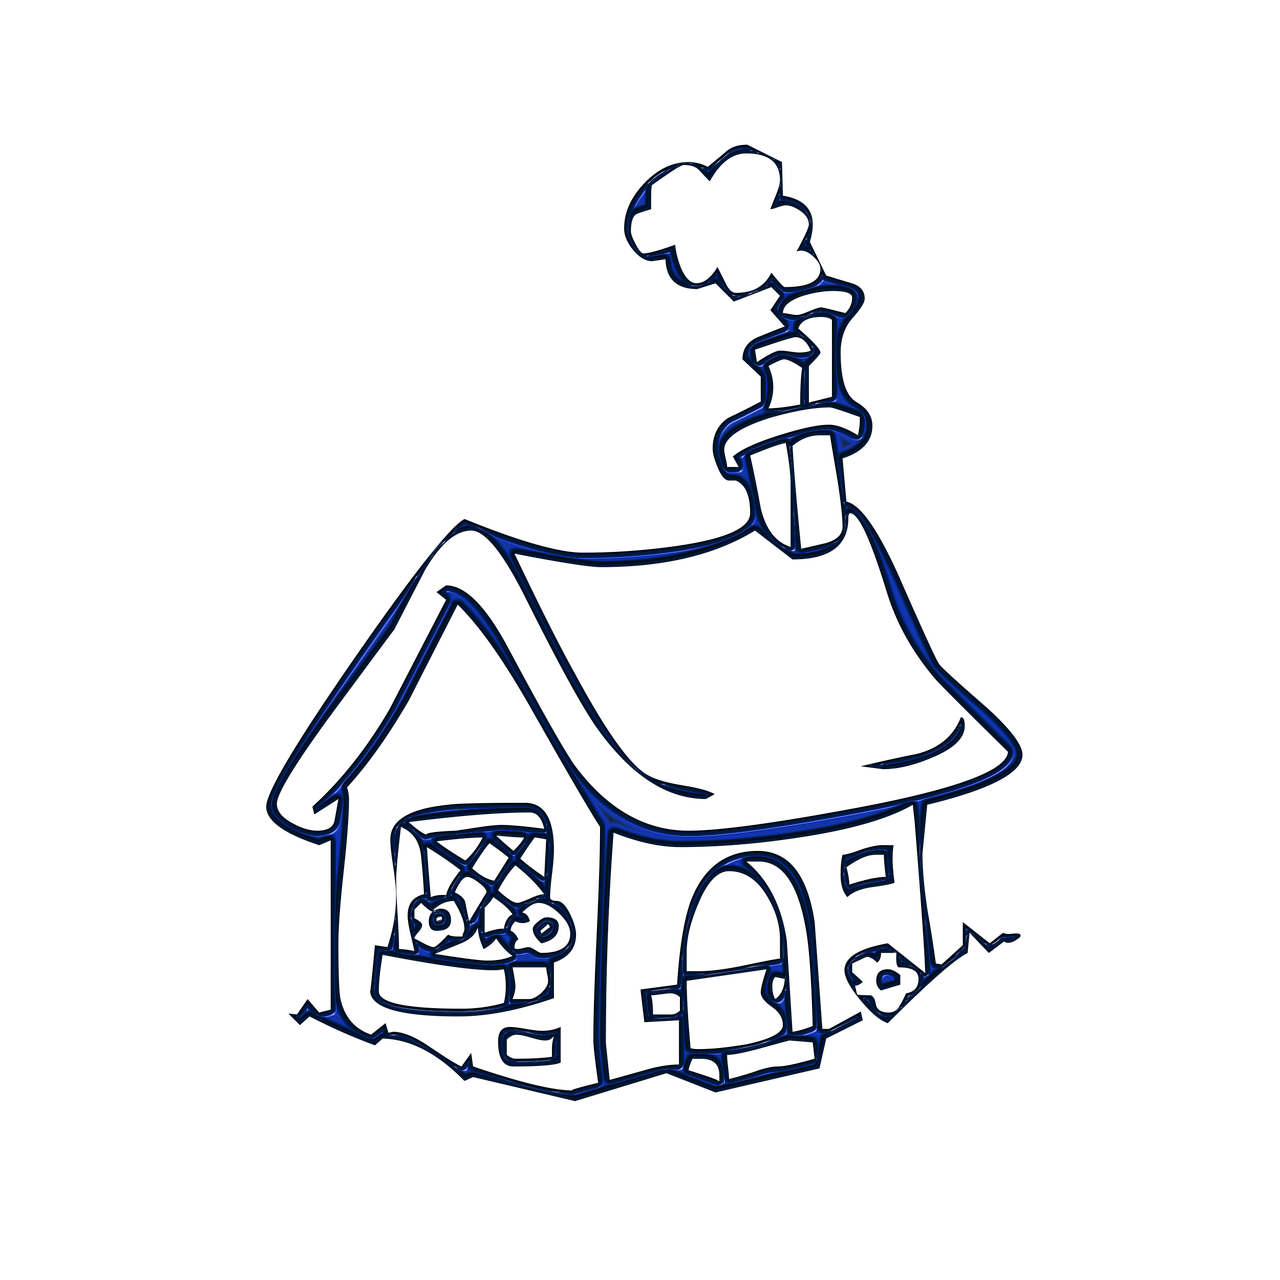 a drawing of a house with a chimney, flickr, graffiti, dark blue neon light, sketched 4k, fairy tale style background, on black background